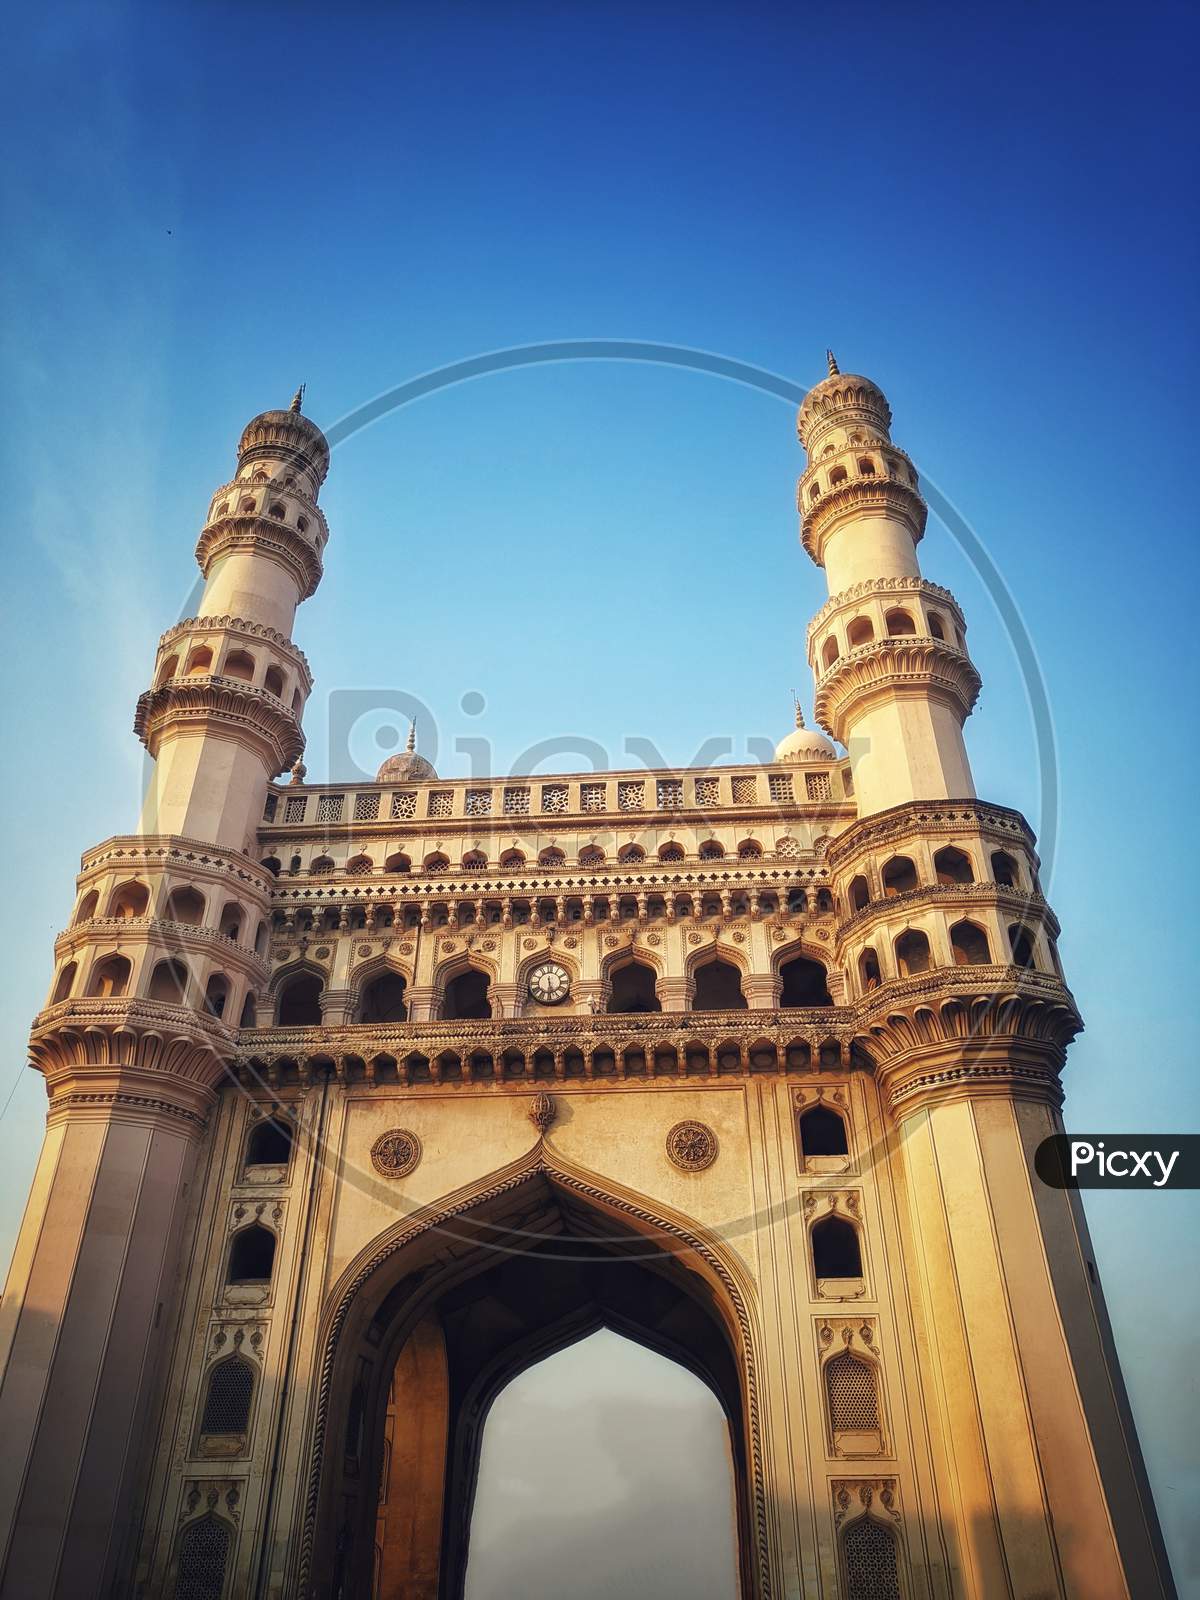 Charminar The Iconing Building, Is Listed Among The Famous Love Structures In India, Built In 1591, Hyderabad.